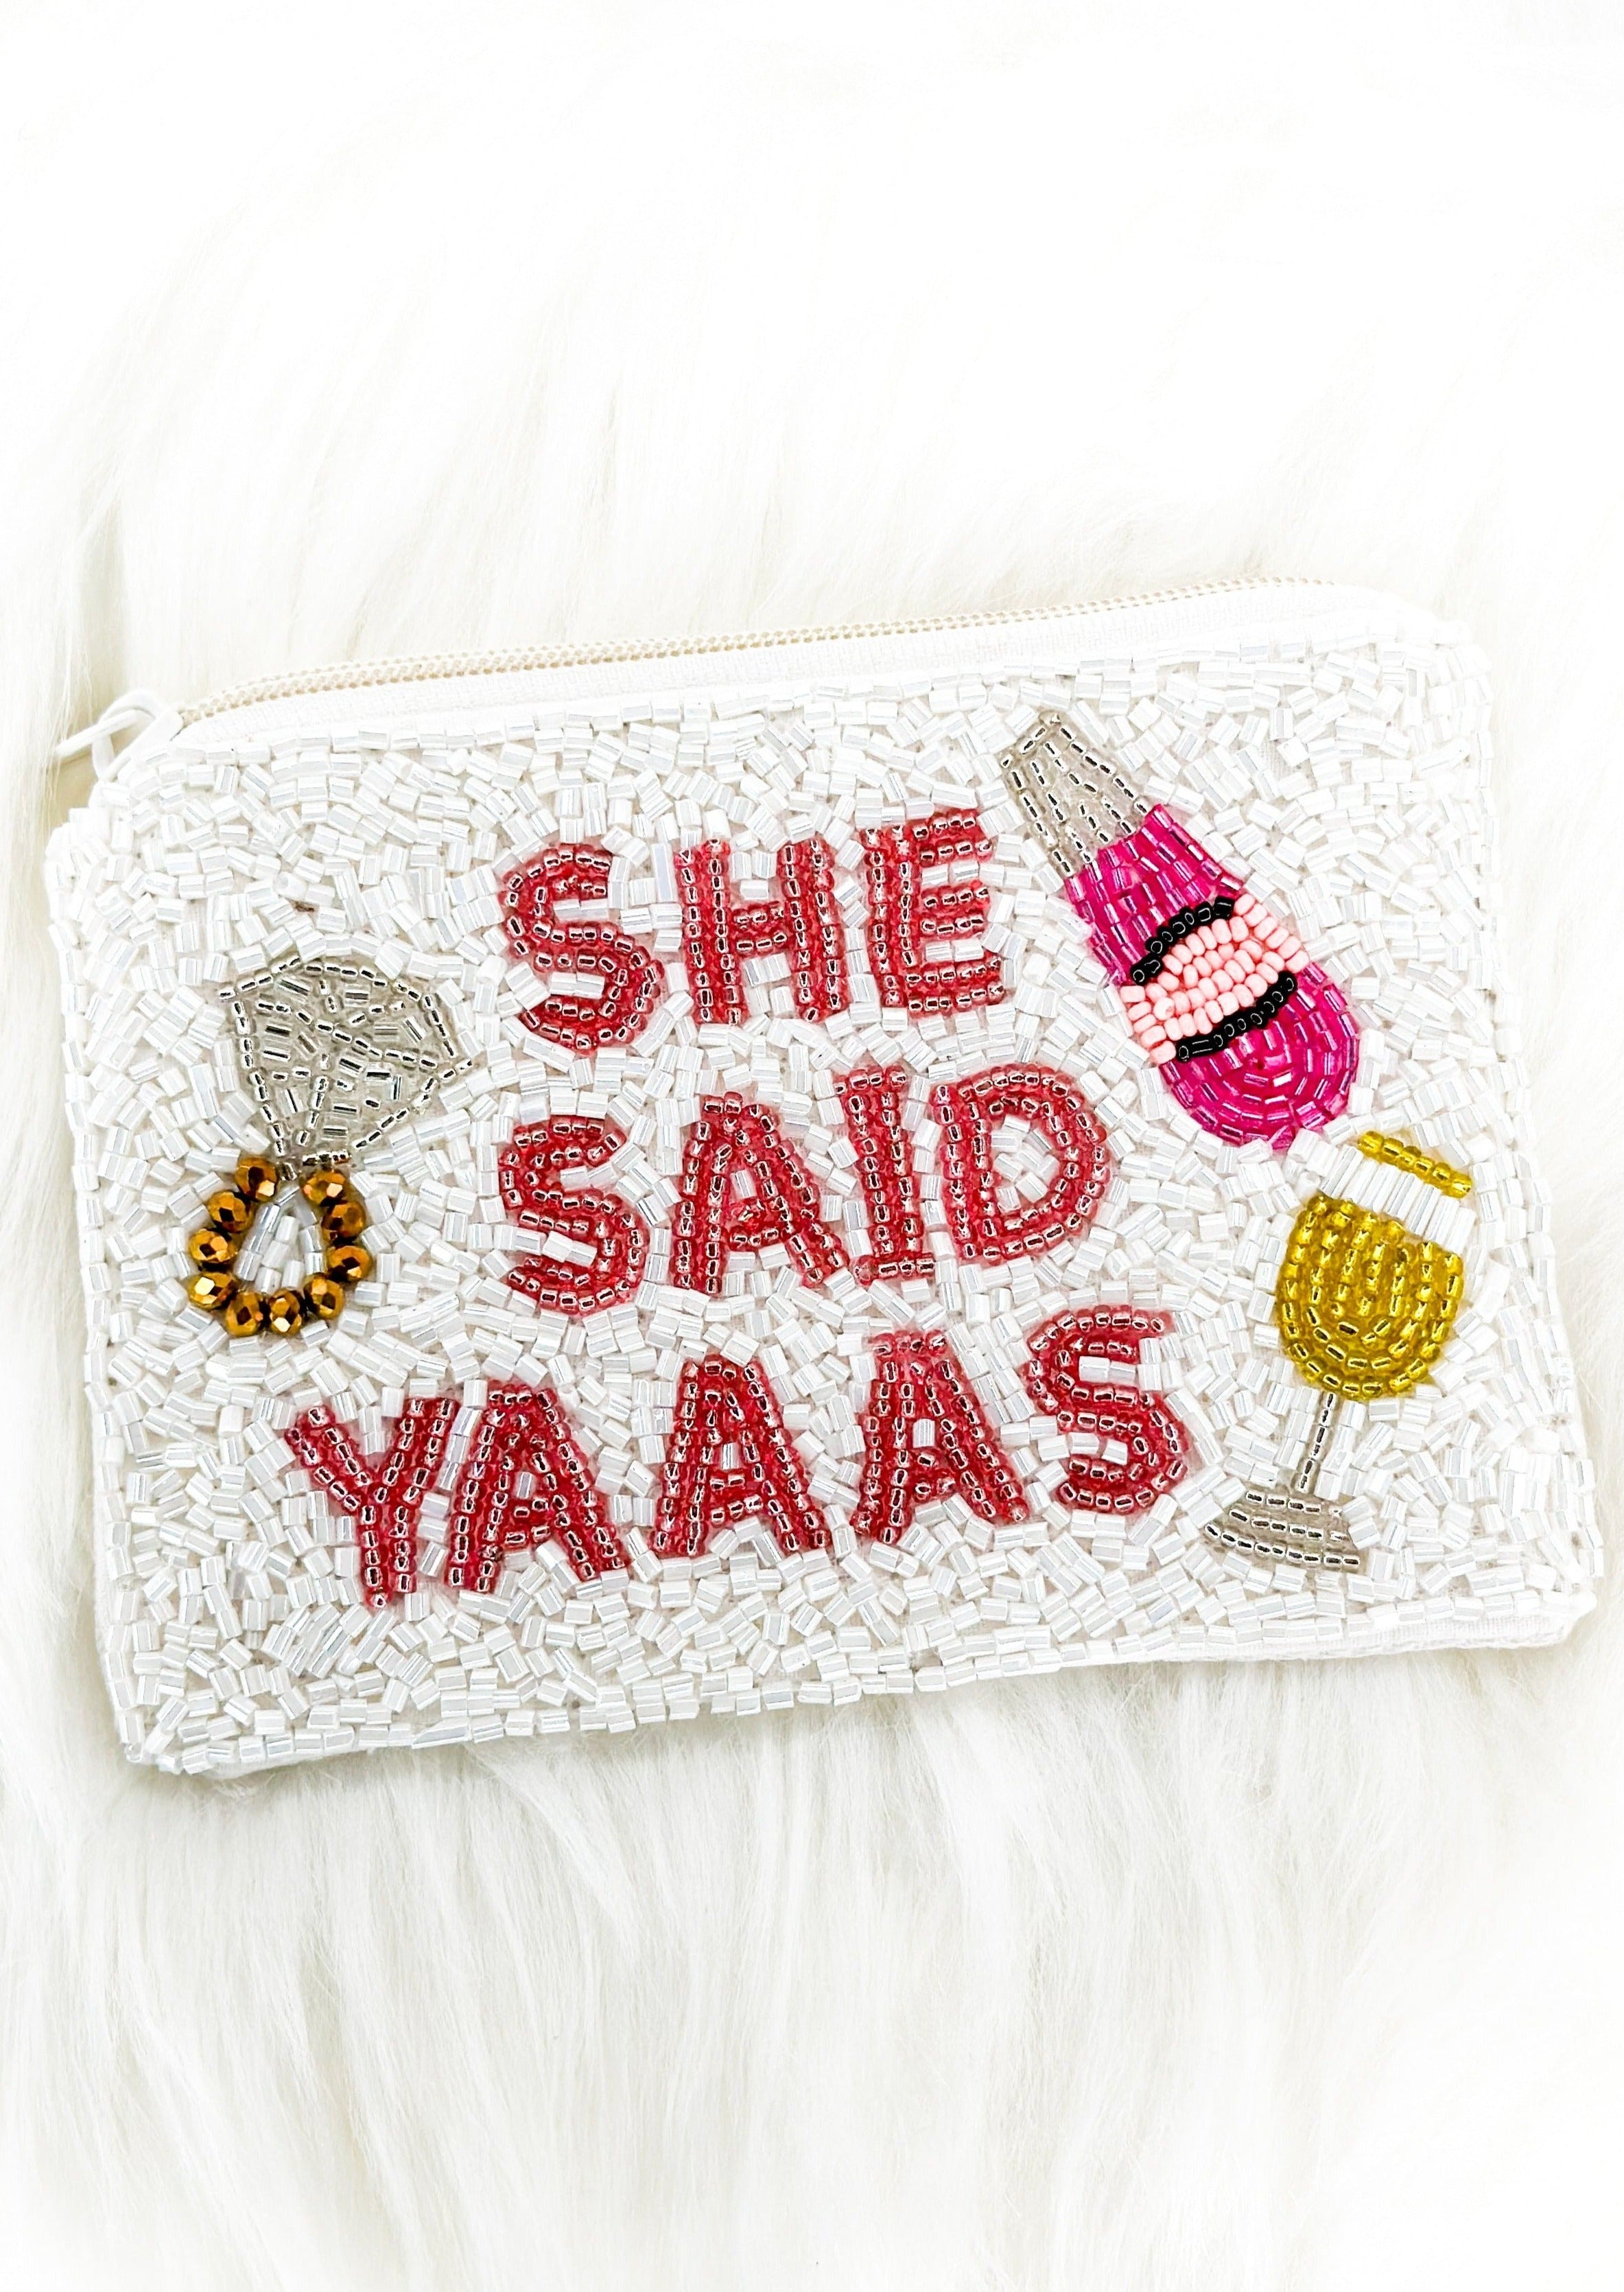 white seed bead coin purse with white zipper - she said yaaas spelled out on one side inn red beads - beaded picture of ring, champagne glass and wine bottle